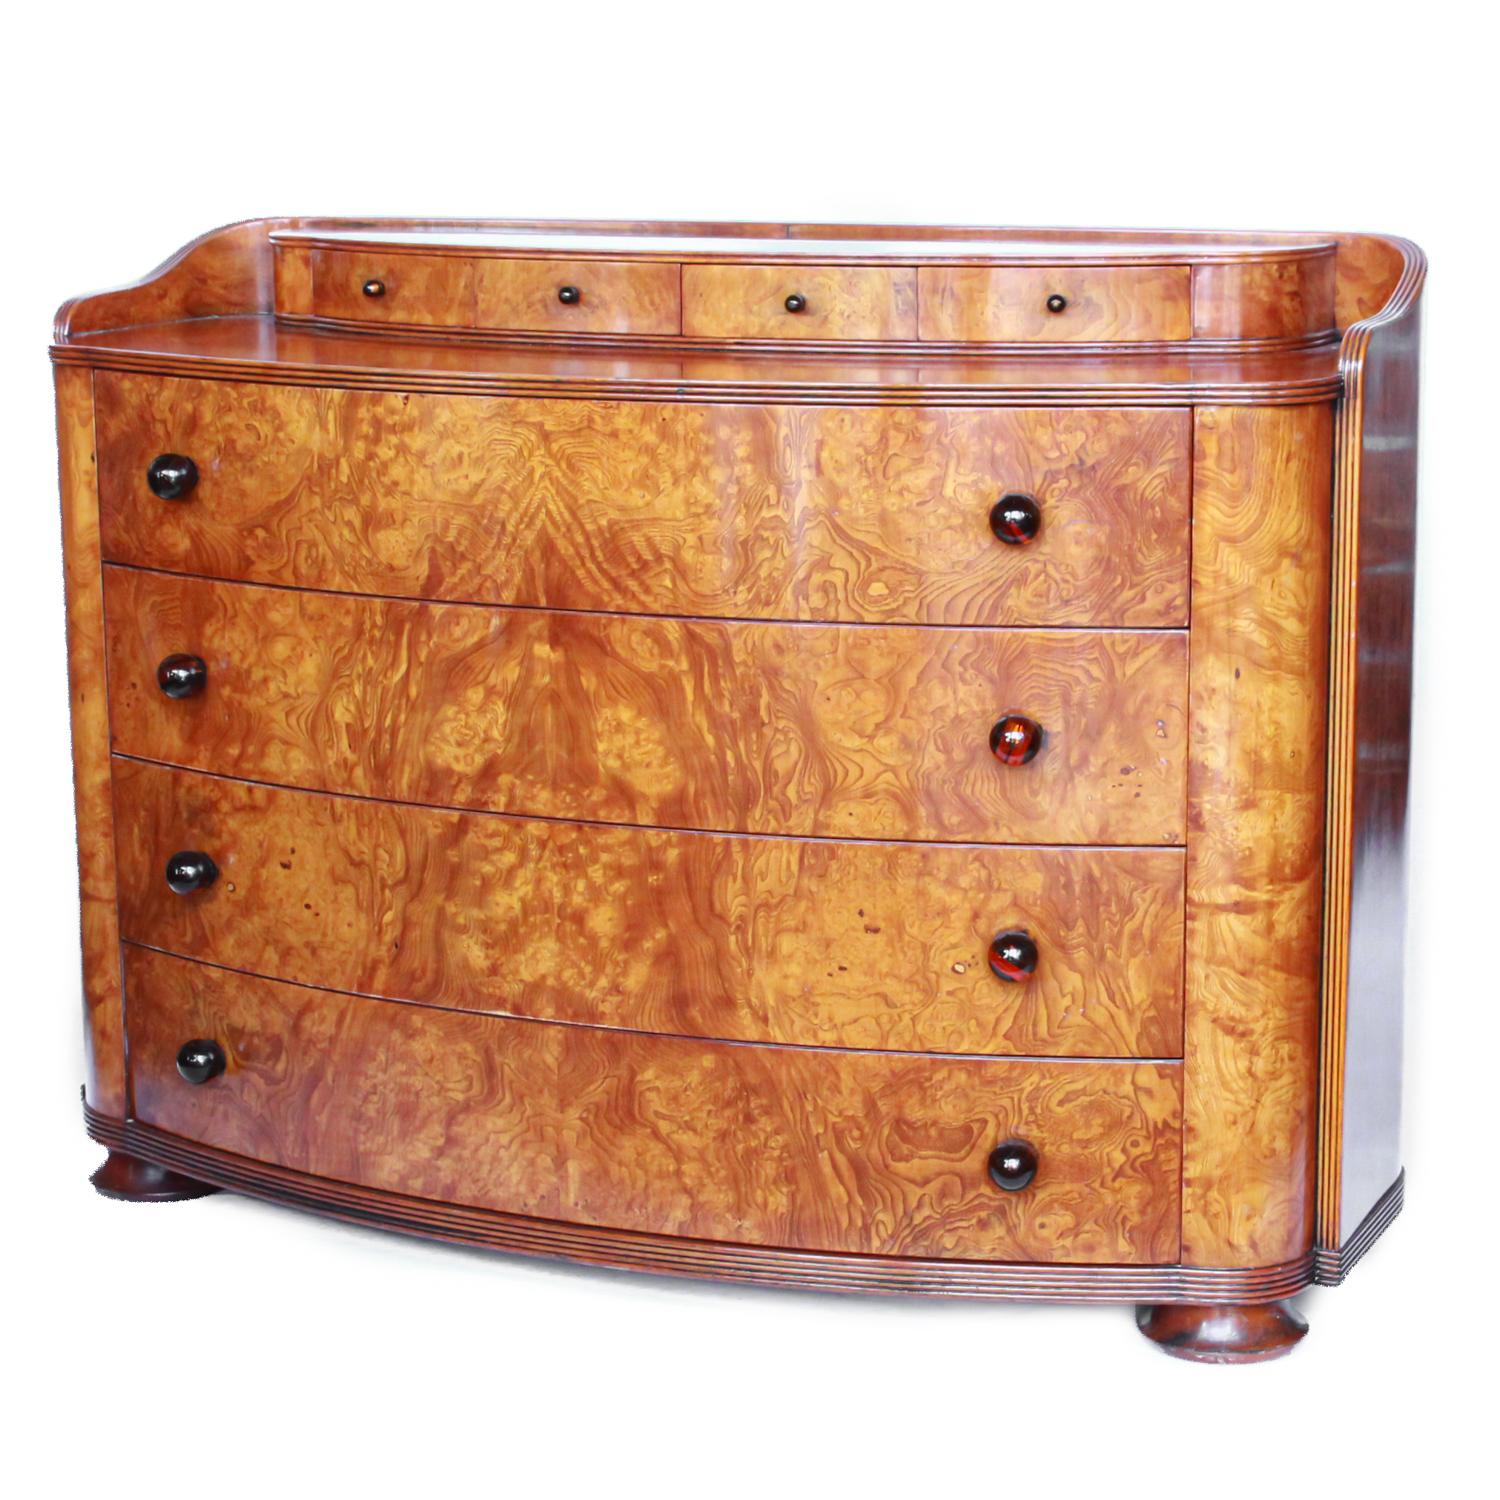 A pair of Art Deco style chests of drawers with burr elm veneers surrounding entire chests. Original amber style handles. Excellent quality and proportions.

Date: circa 1970

Origin: English

Dimensions: H 87cm, W 120cm, D 47cm

Item no: